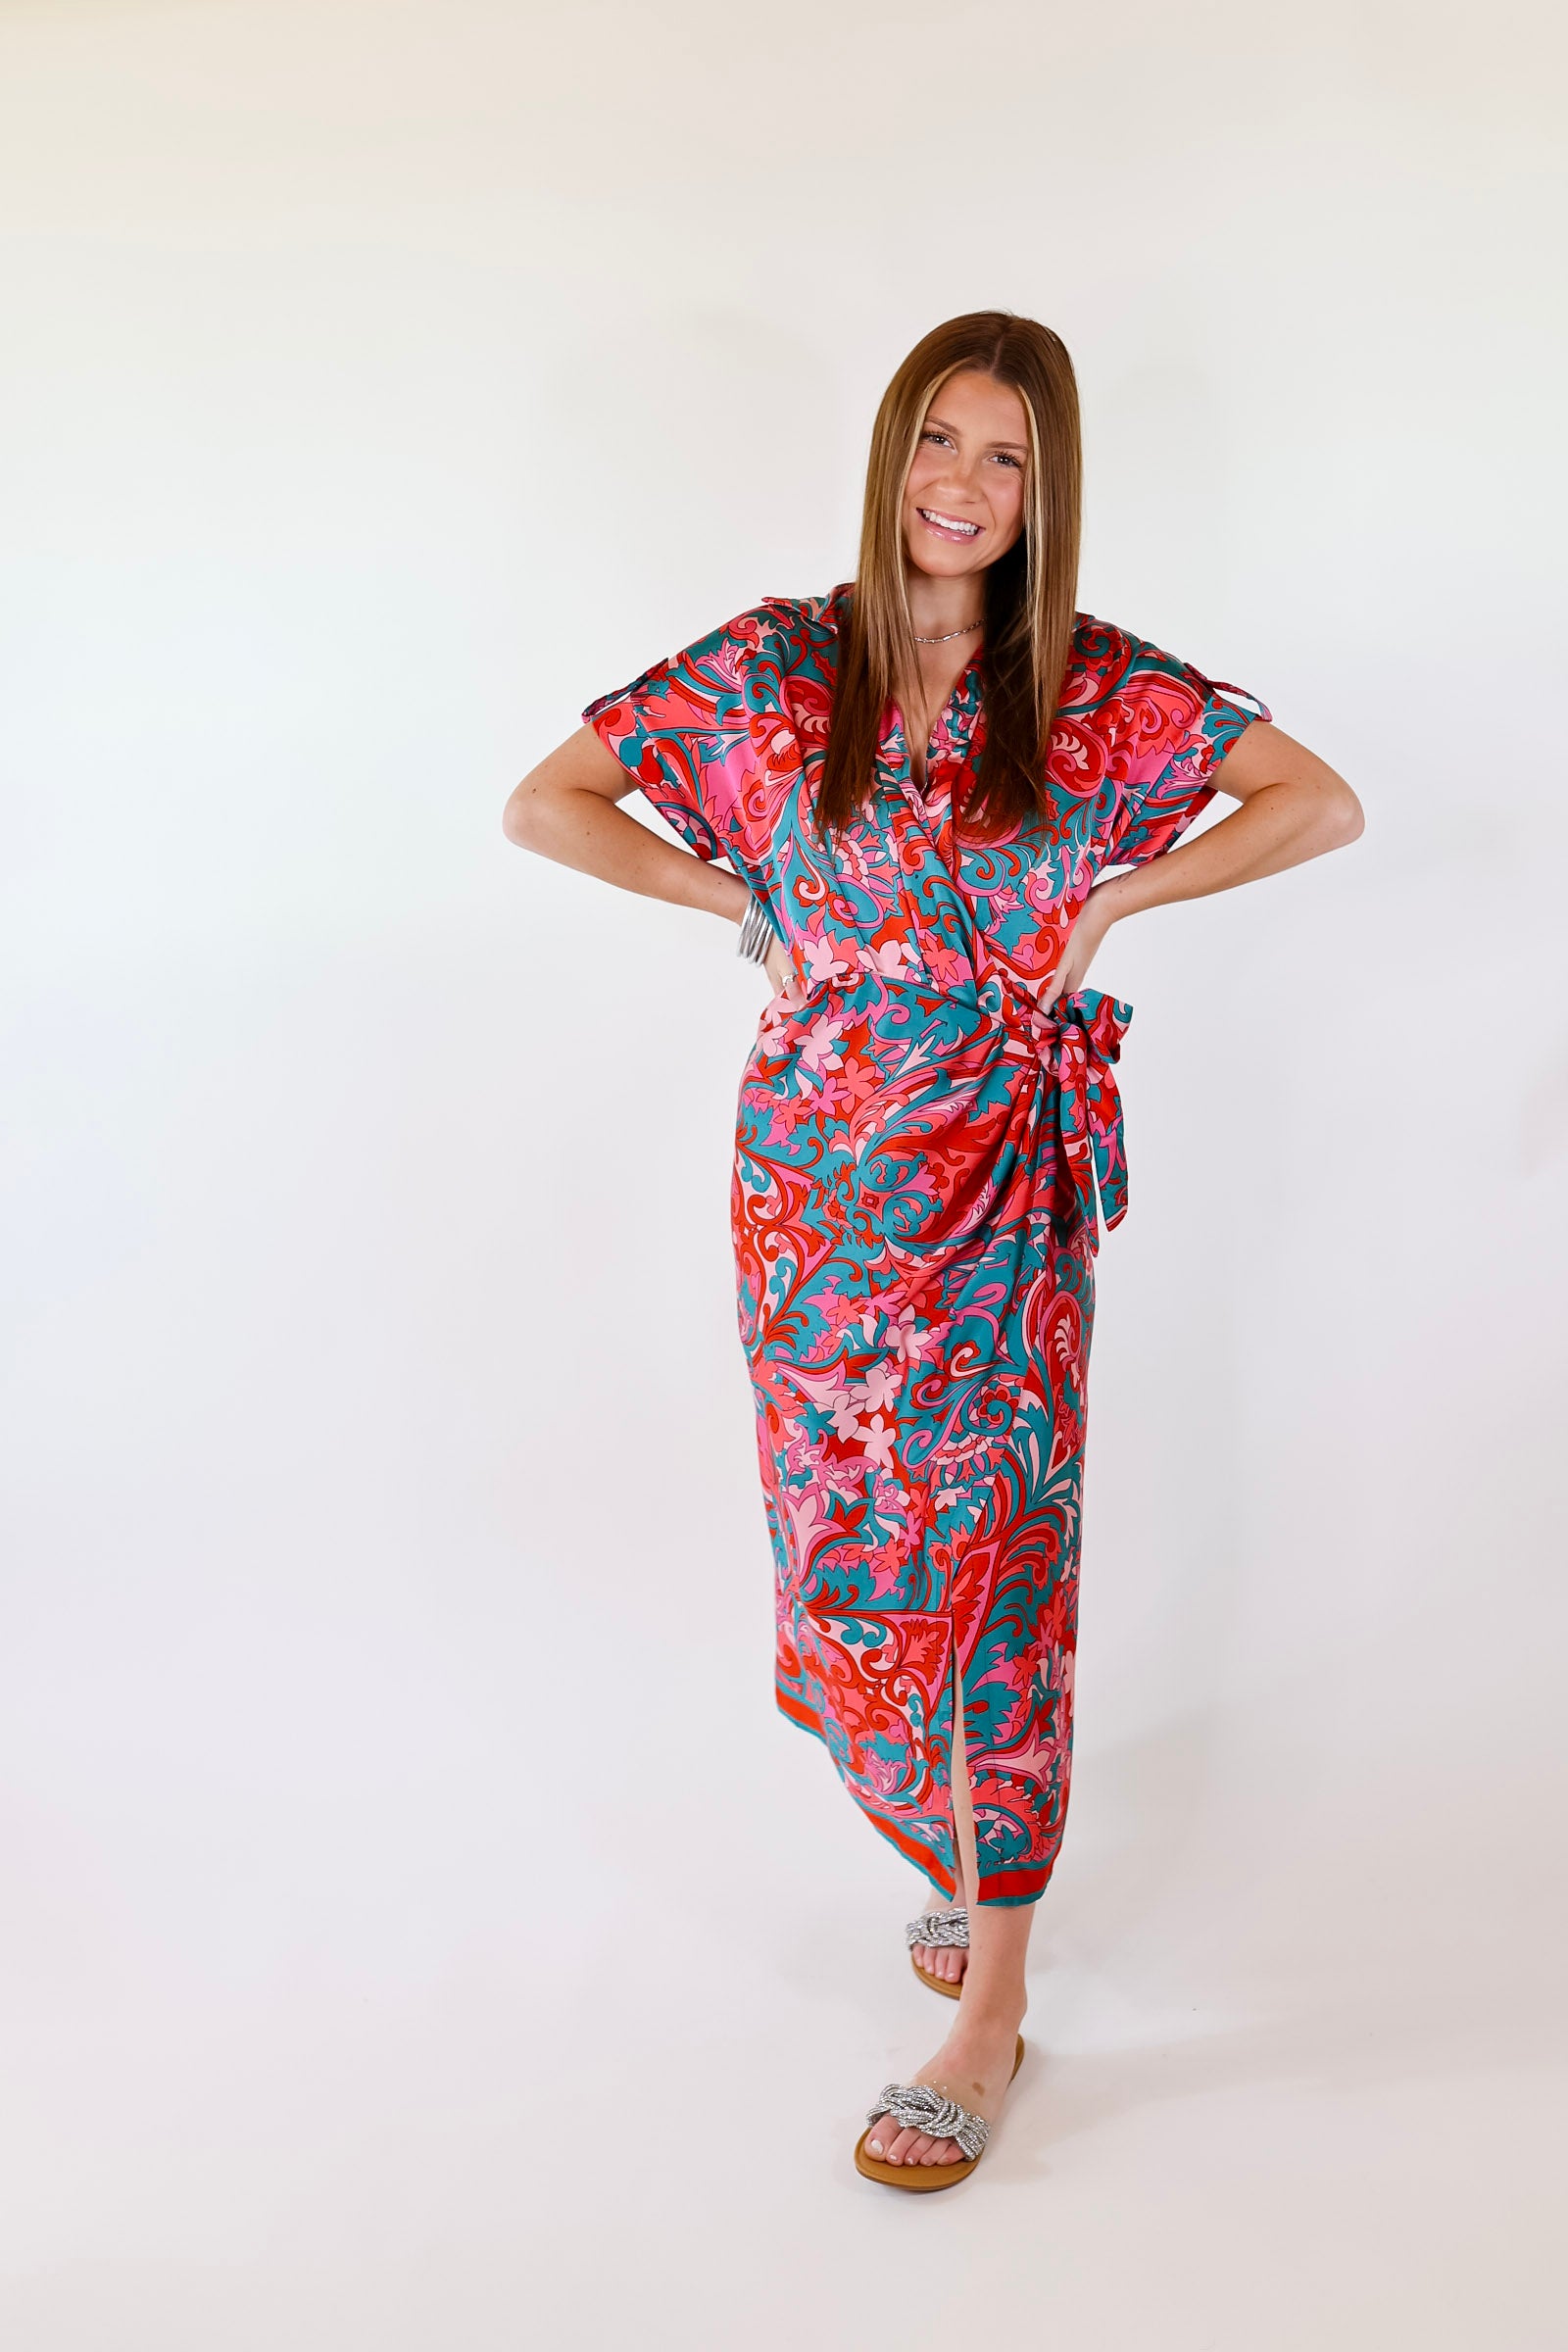 Room With A View Baroque Print Wrap Midi Dress in Pink and Teal - Giddy Up Glamour Boutique